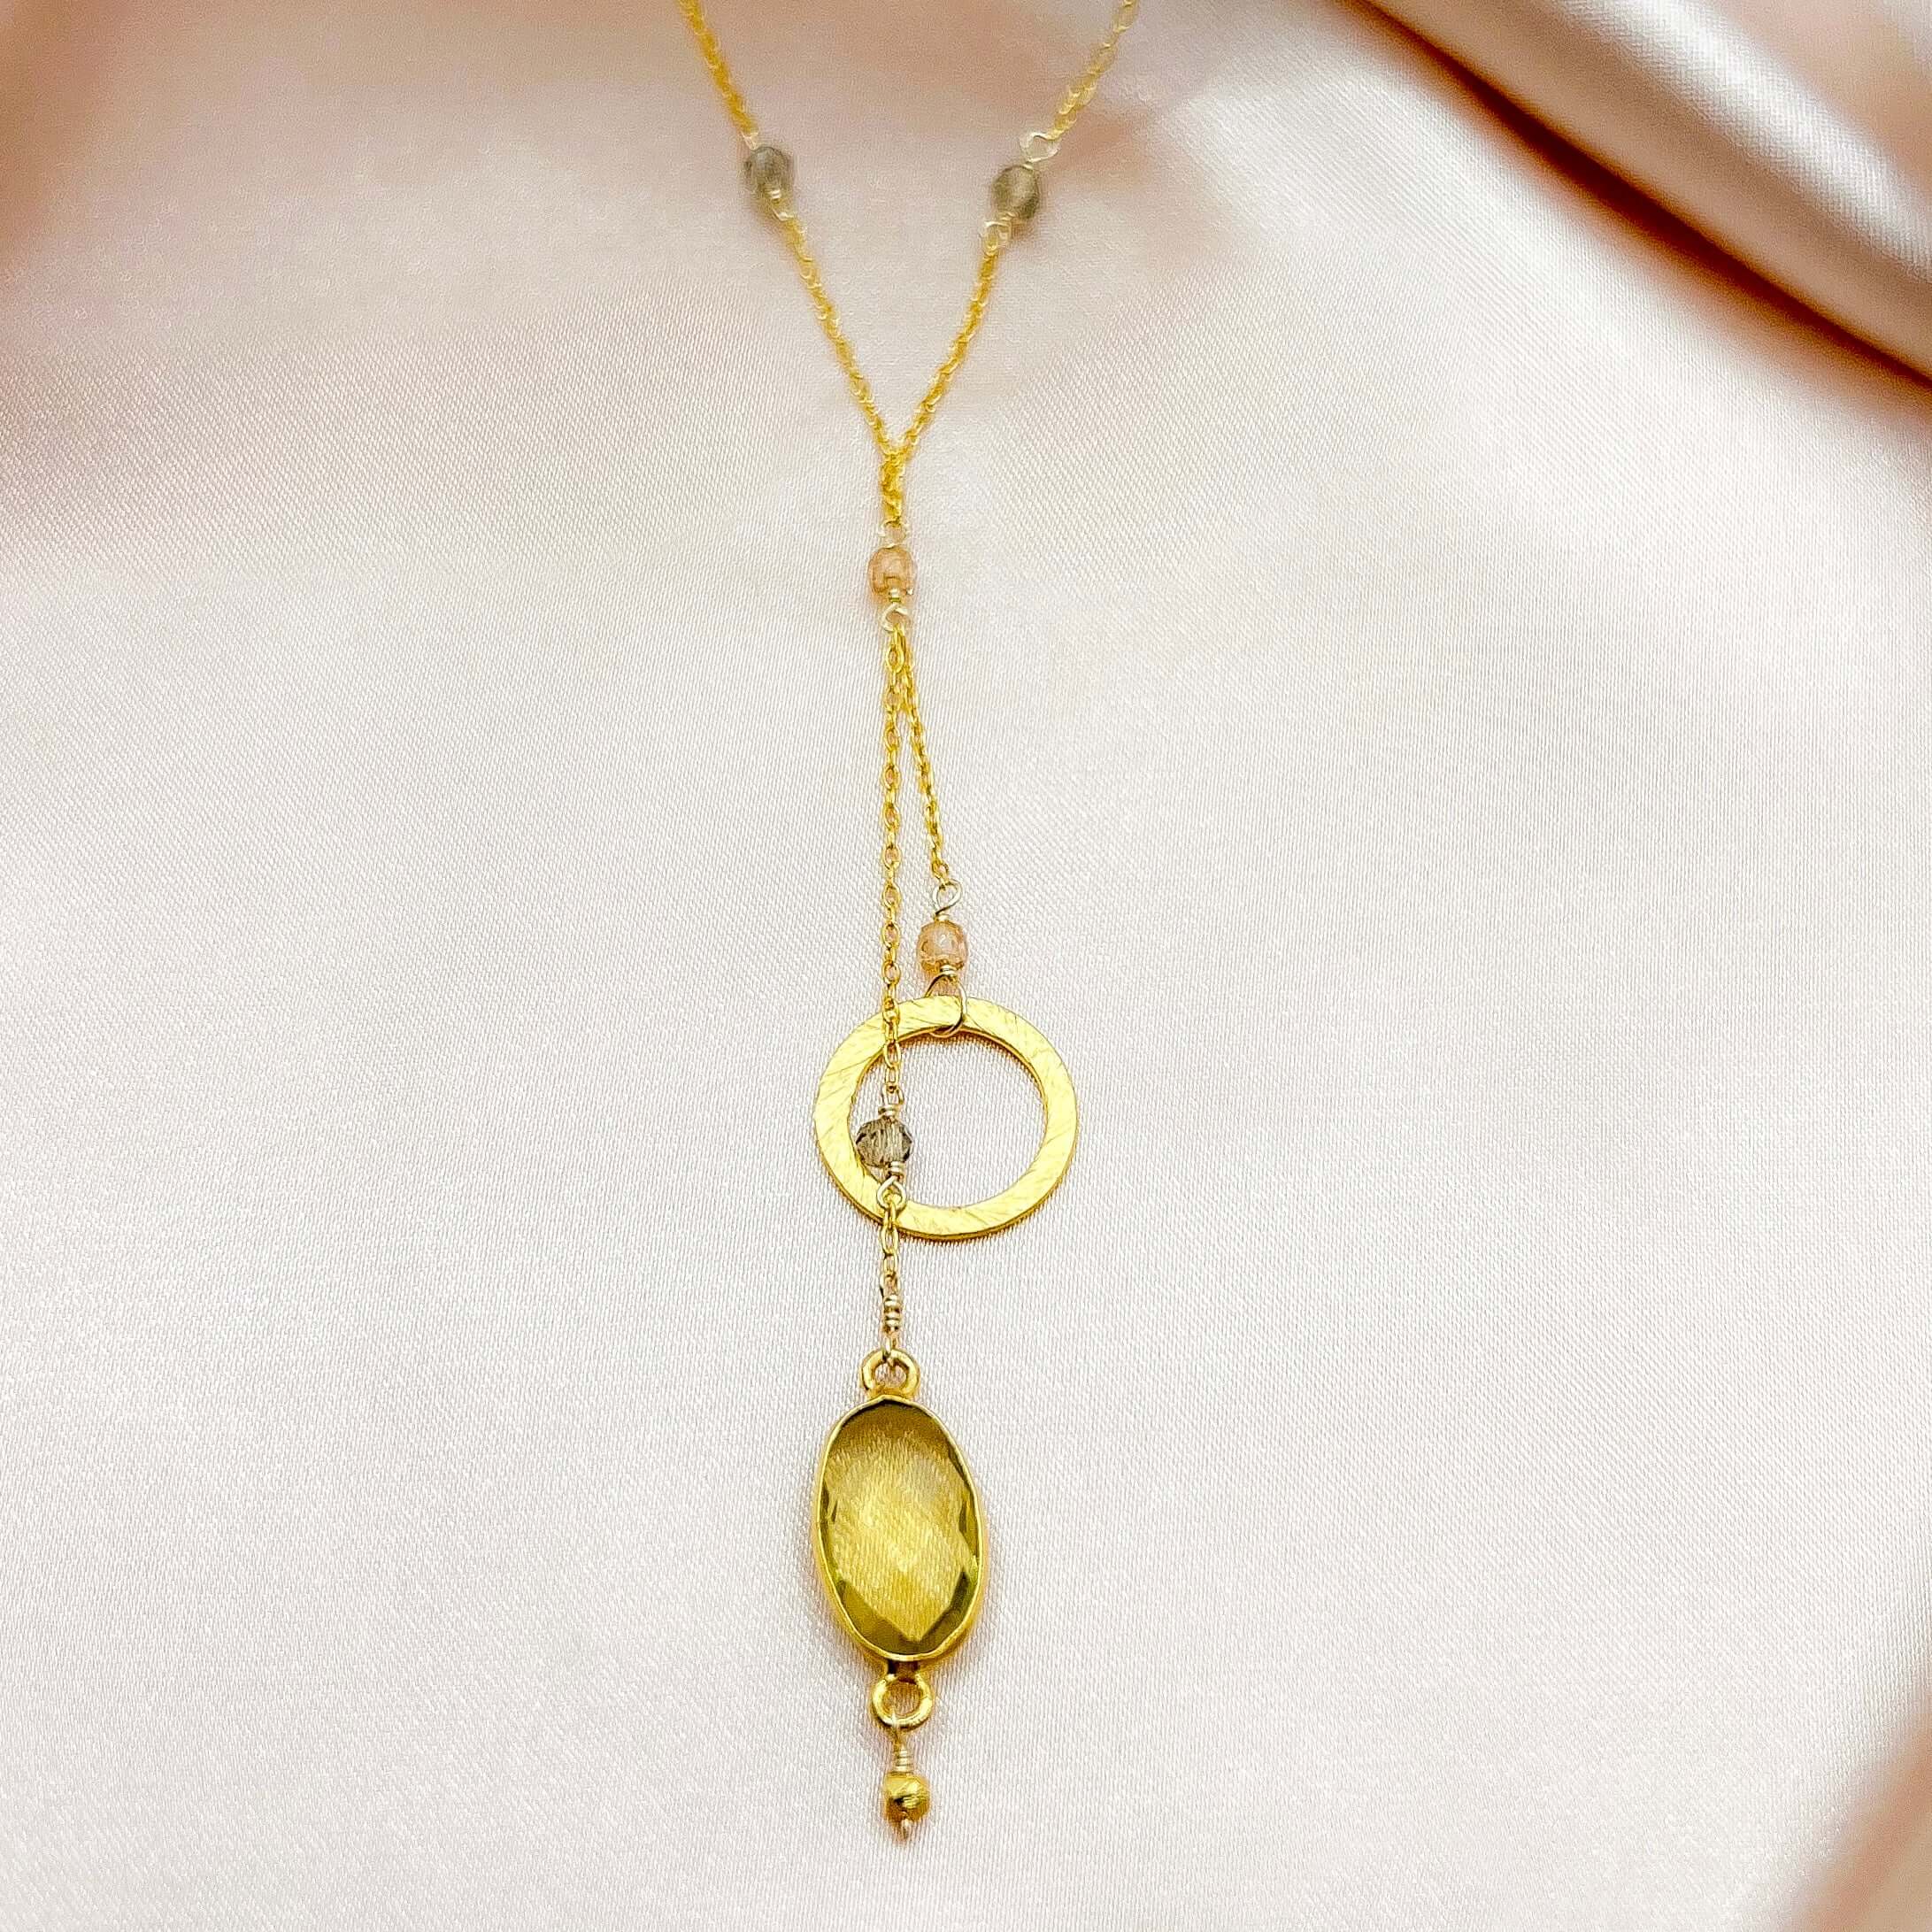 Ballet Necklace with Citrine Gemstone and Elegant Circle Accent